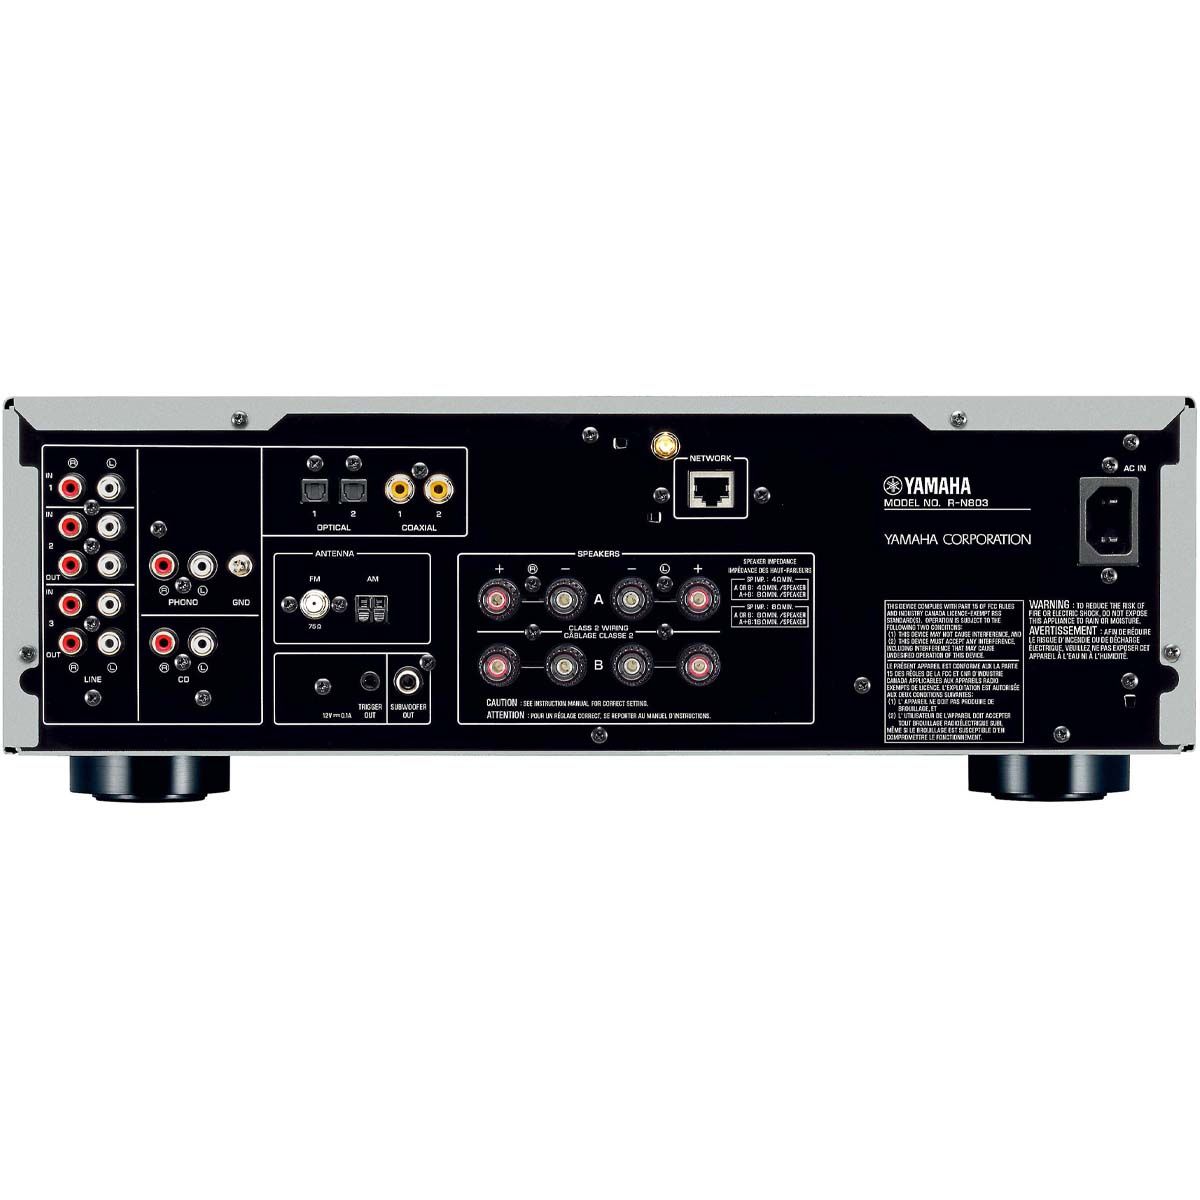 Yamaha R-N803BL Network Stereo Receiver - Black - rear view